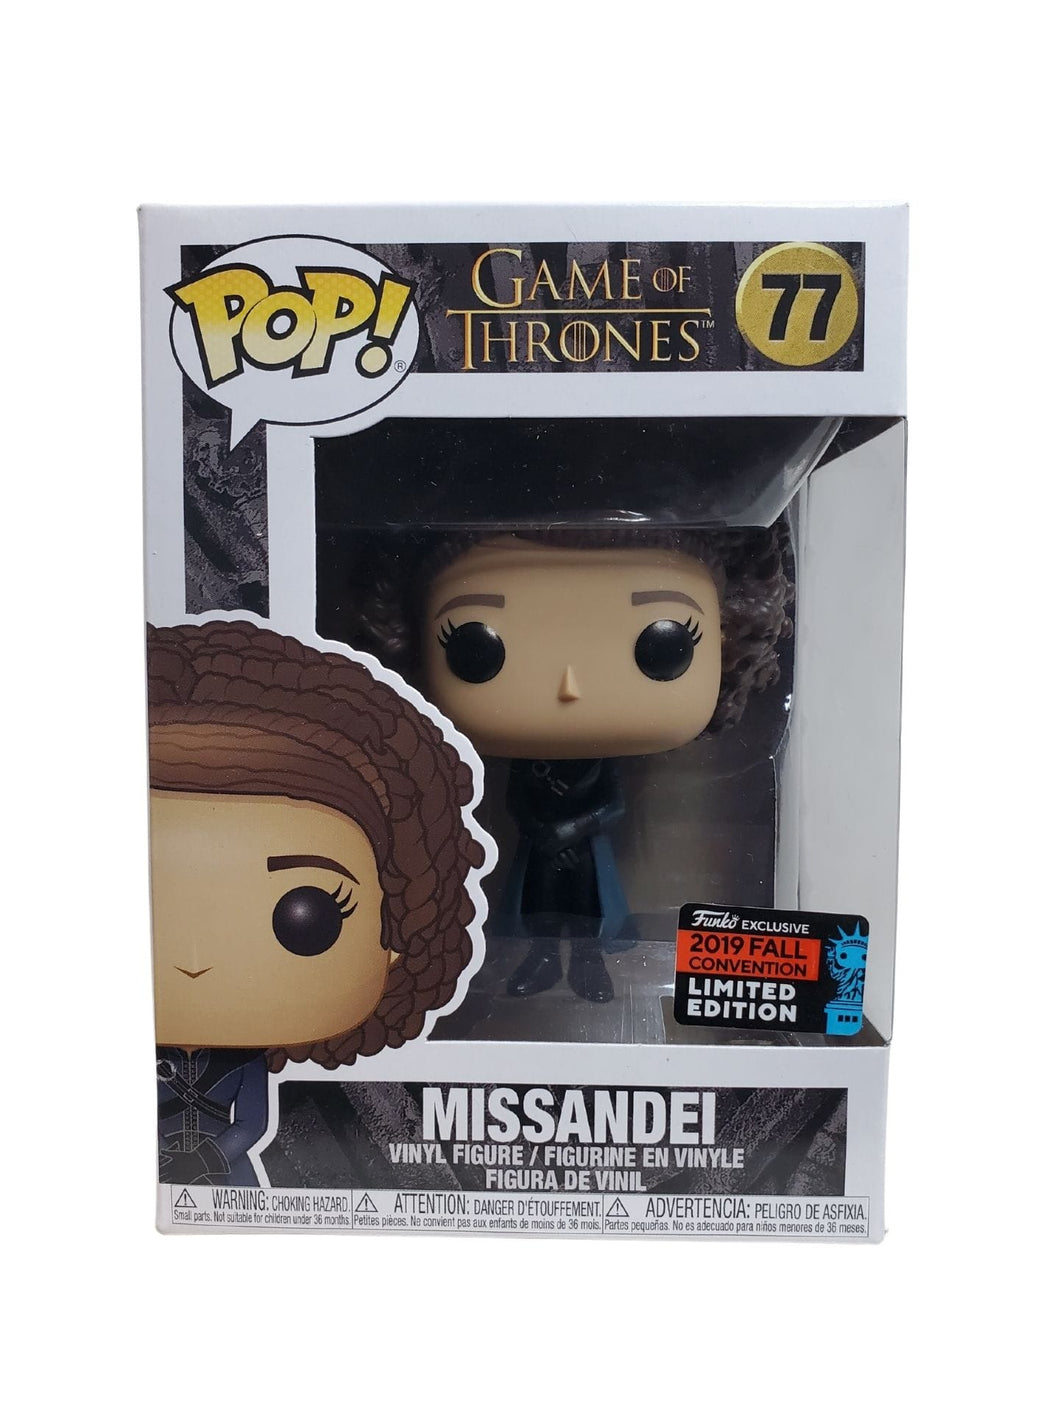 Game of Thrones Missandei 2019 Fall Convention Funko POP